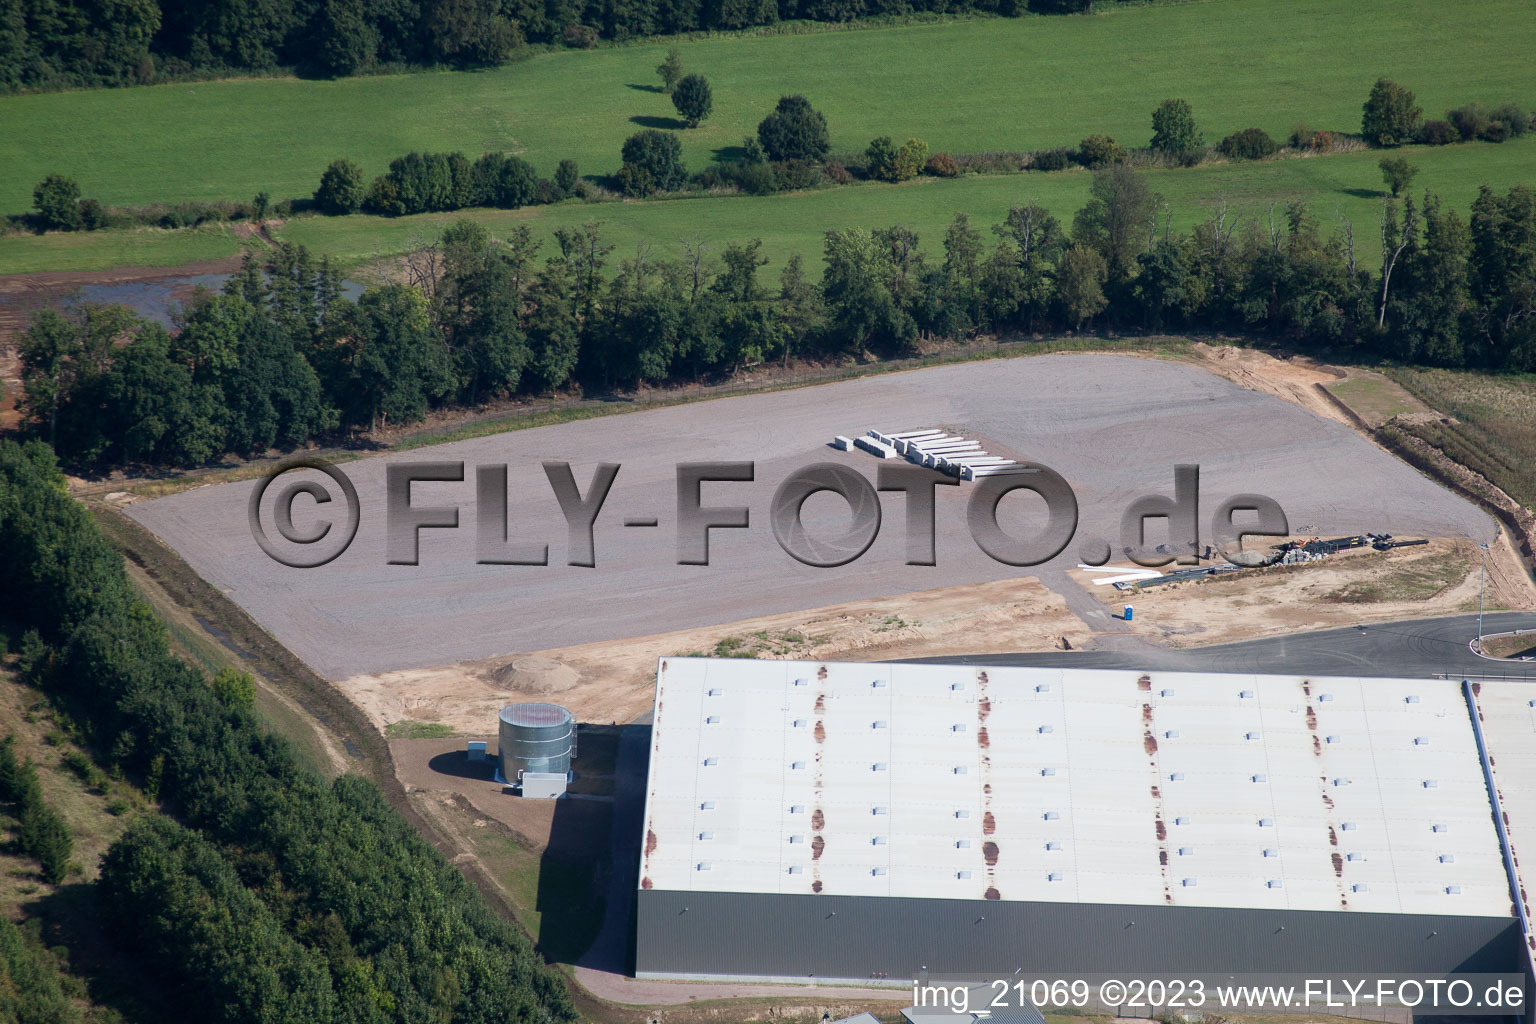 Coincidence logistics center in the district Minderslachen in Kandel in the state Rhineland-Palatinate, Germany from a drone